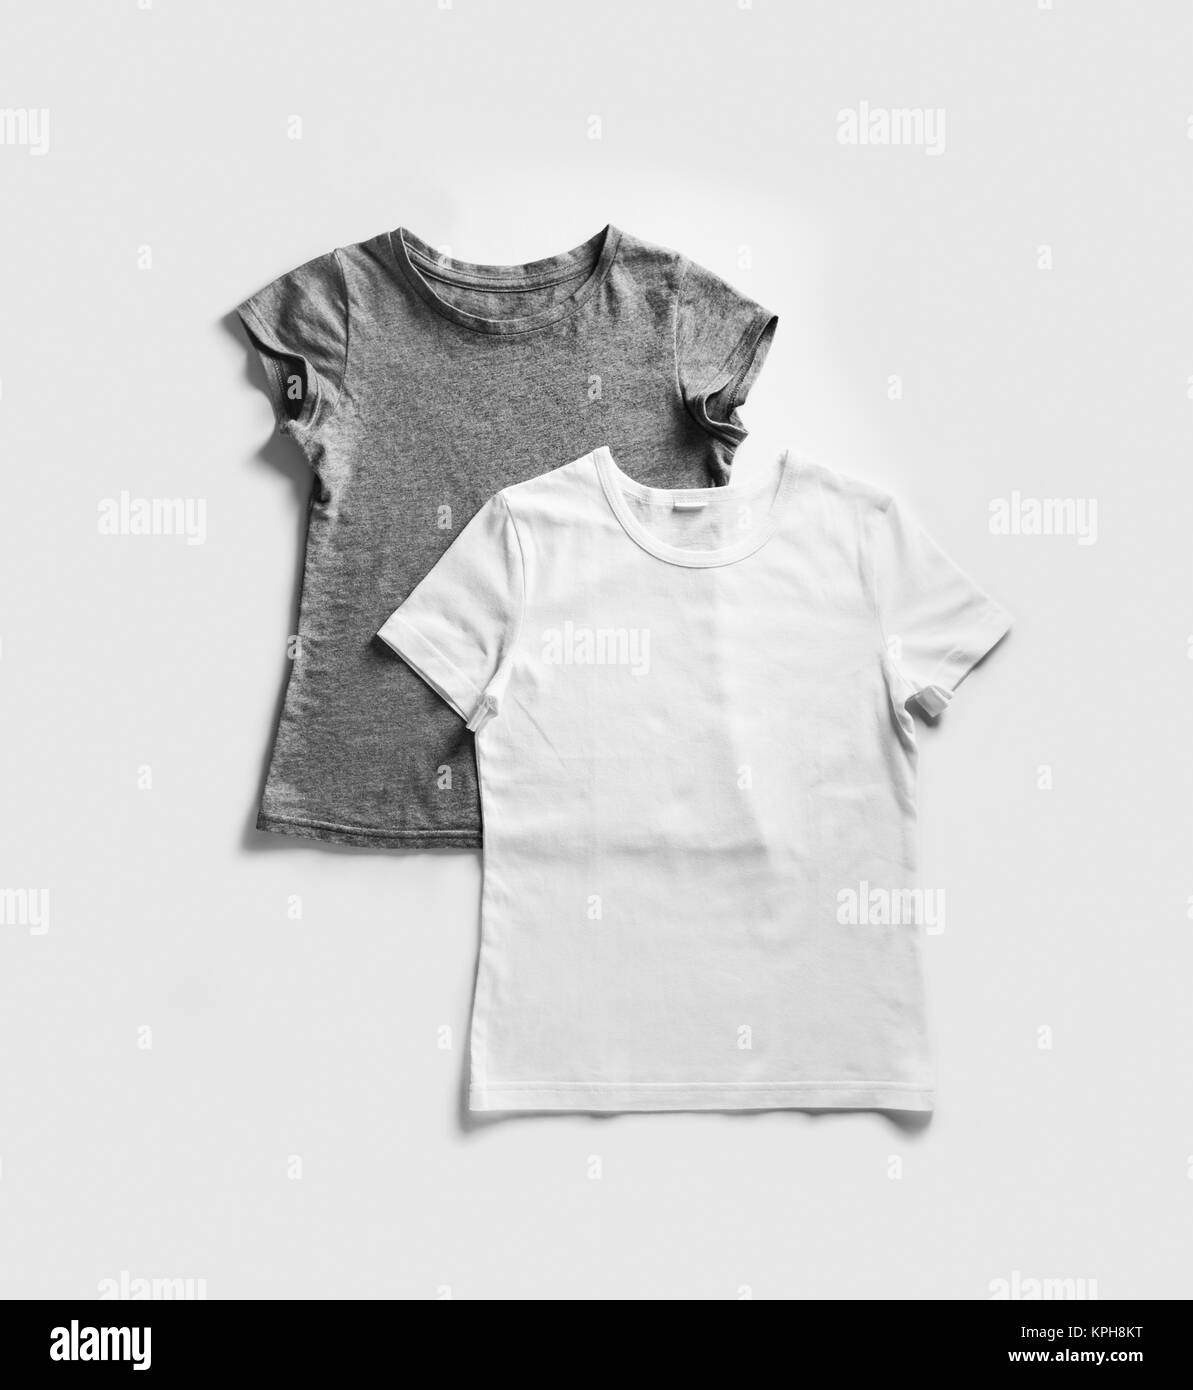 Blank white and gray t-shirts for your design on white paper background. Tshirt template. Flat lay. Stock Photo